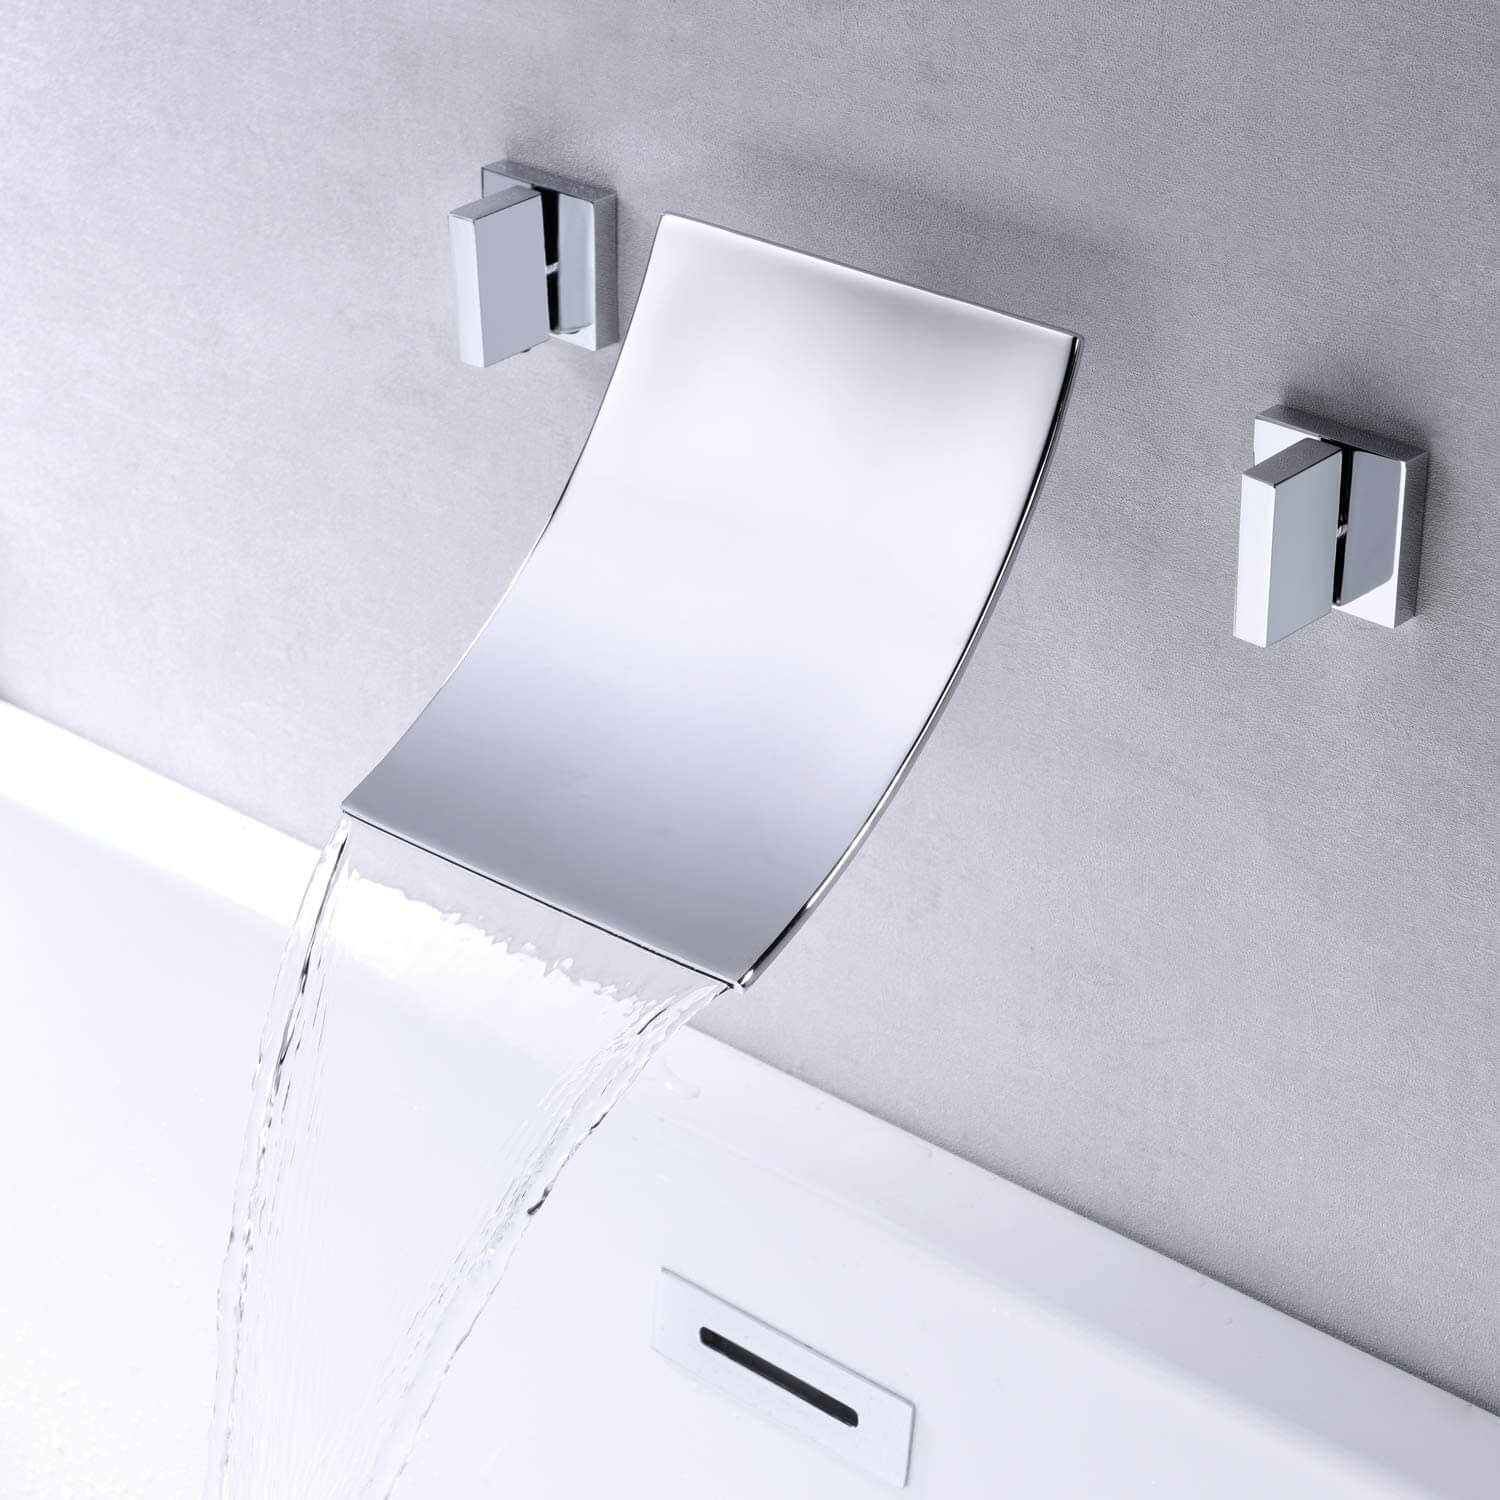 wowow 2 handle 3 hole wall mount chrome waterfall tub filler